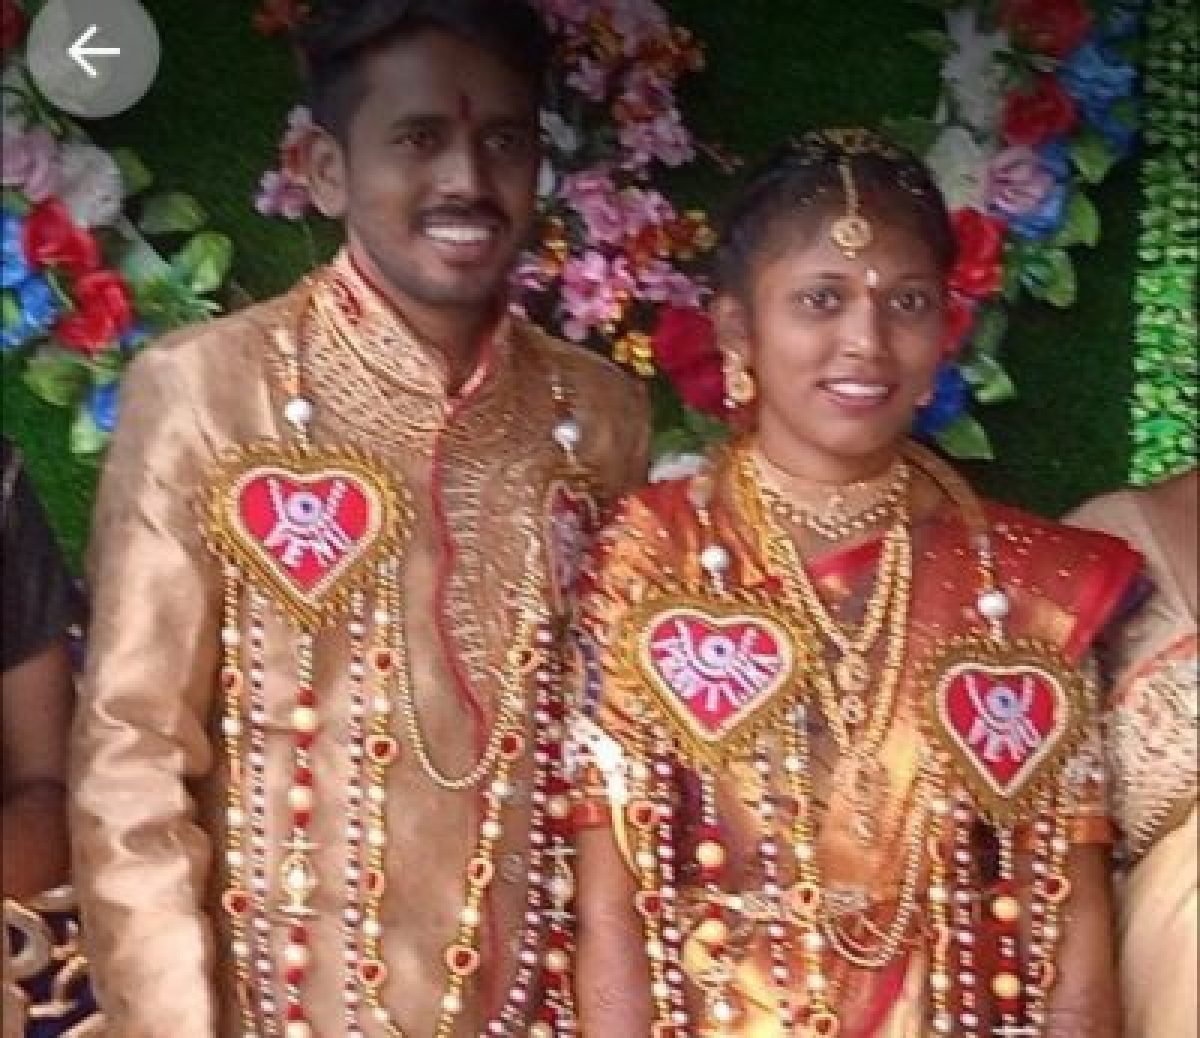 3 Days After Marriage, Couple Dies In Road Mishap In Odisha's ...